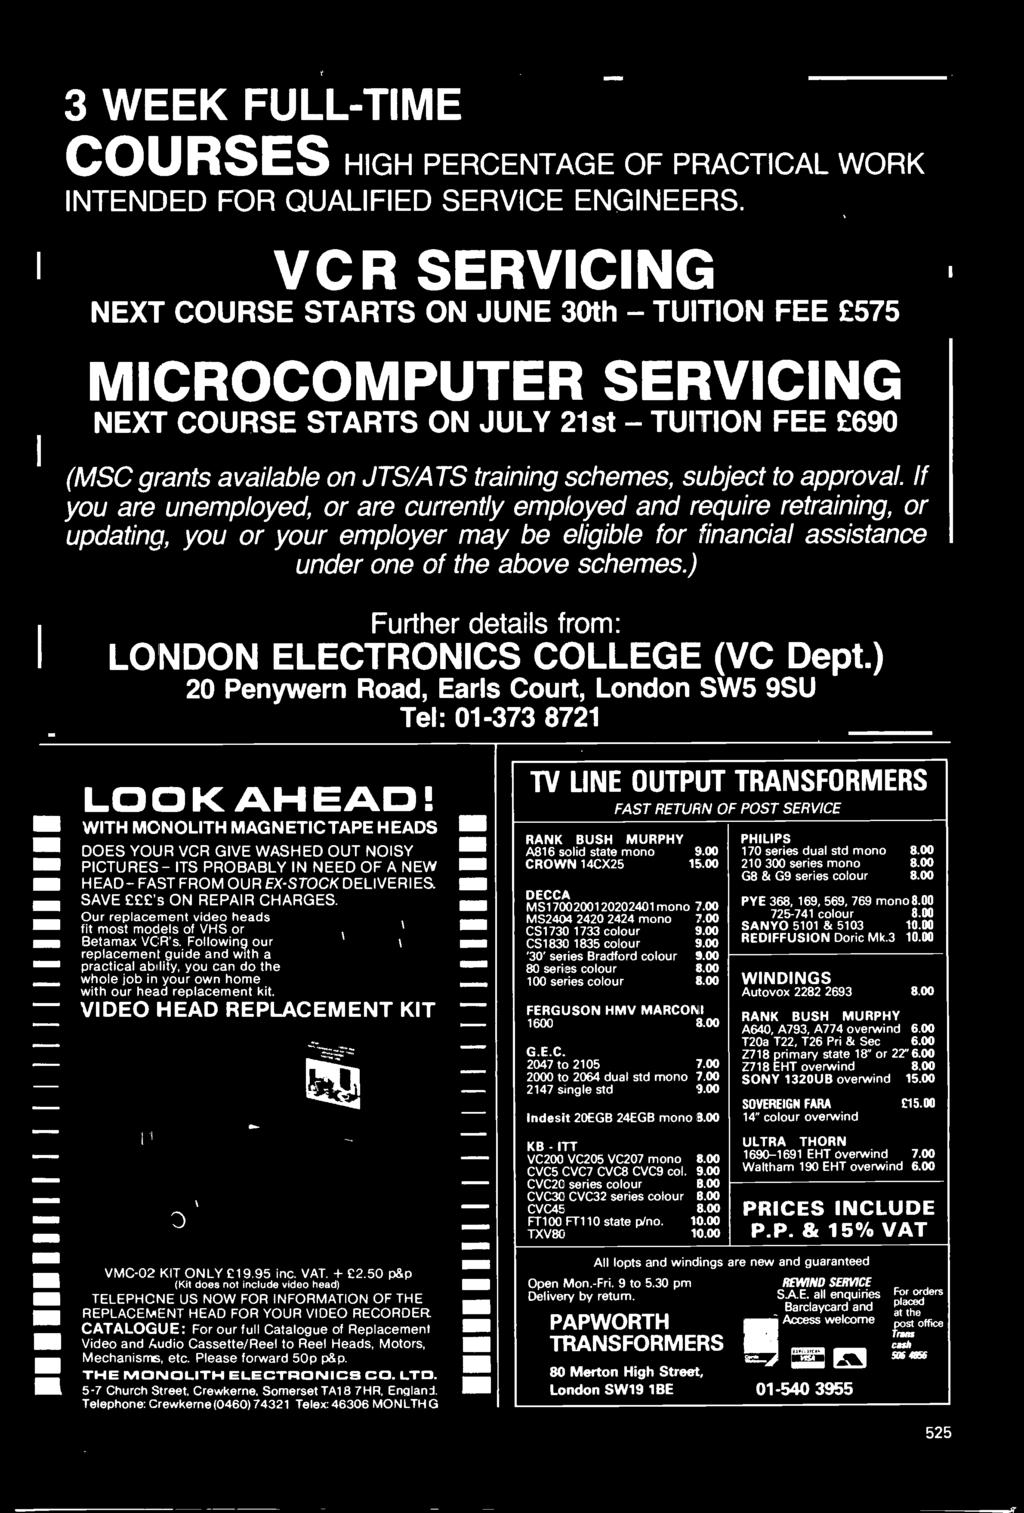 ) 20 Penywern Road, Earls Court, London SW5 9SU Tel: 01-373 8721 LOOK AHEAD WITH MONOLITH MAGNETIC TAPE HEADS ME DOES YOUR VCR GIVE WASHED OUT NOISY NM PICTURES - ITS PROBABLY IN NEED OF A NEW WM